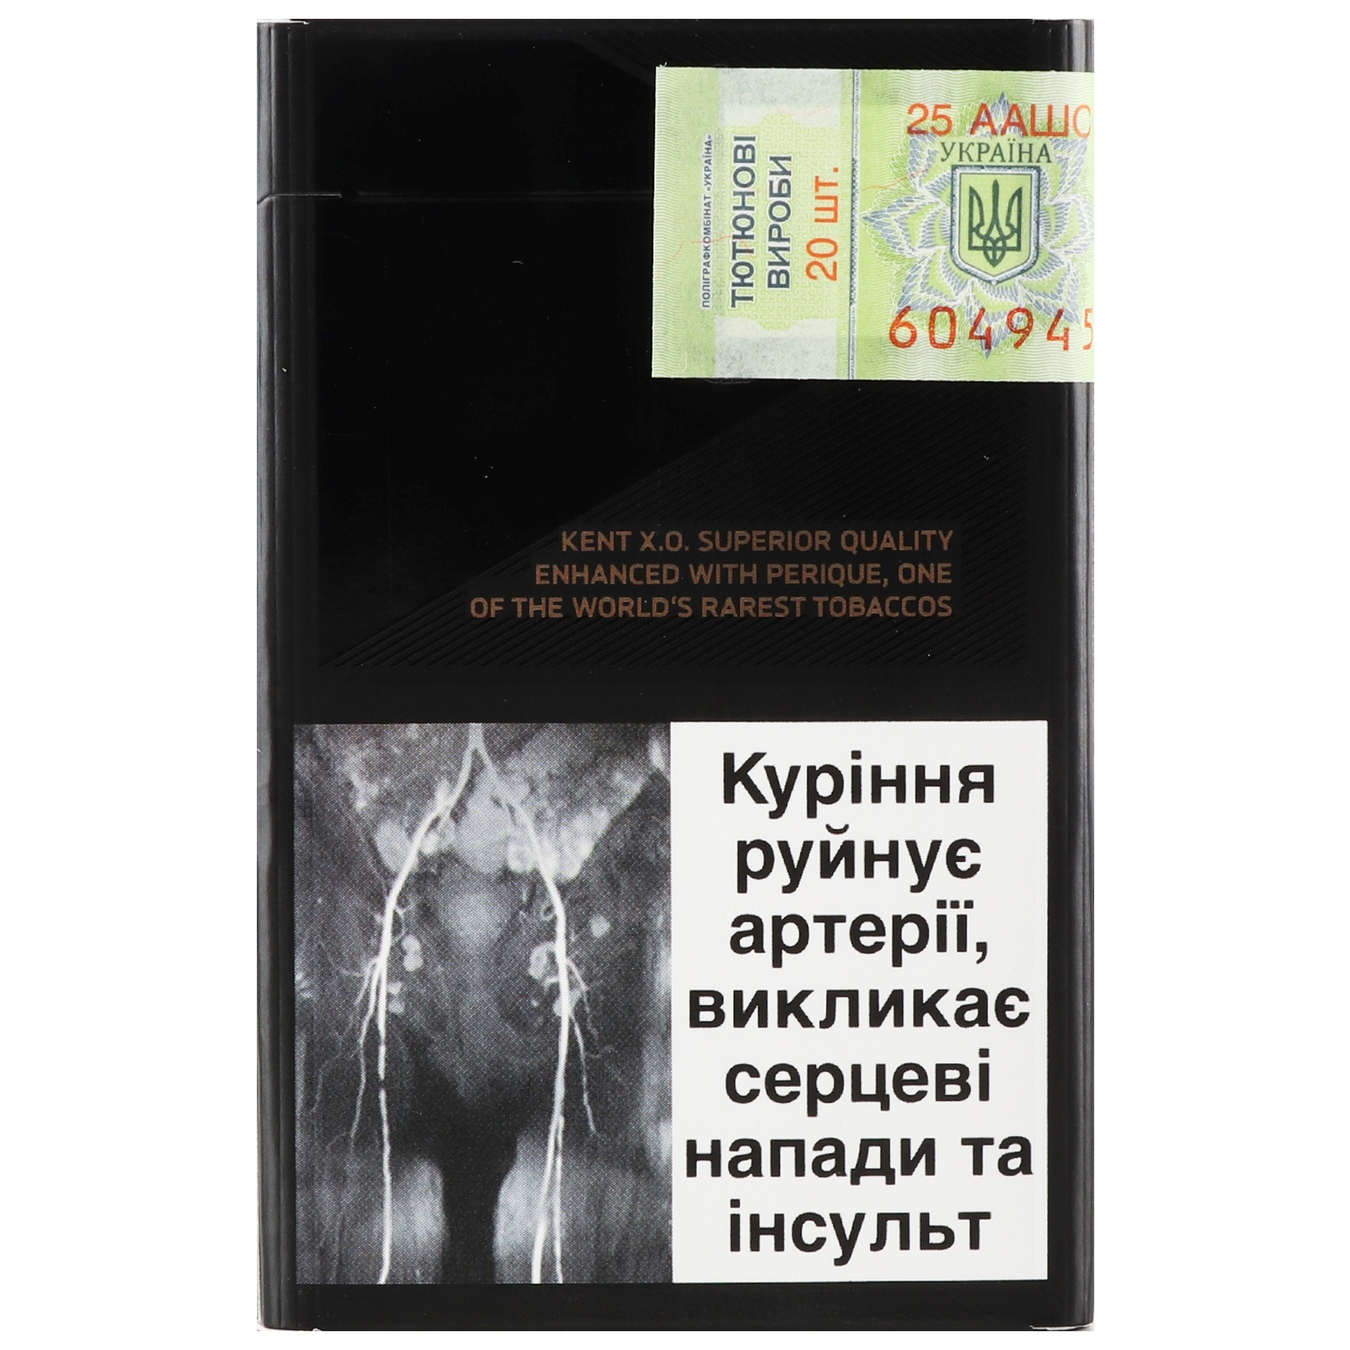 Cigarettes Kent XO Copper KS 20pcs (the price is without excise tax) 5